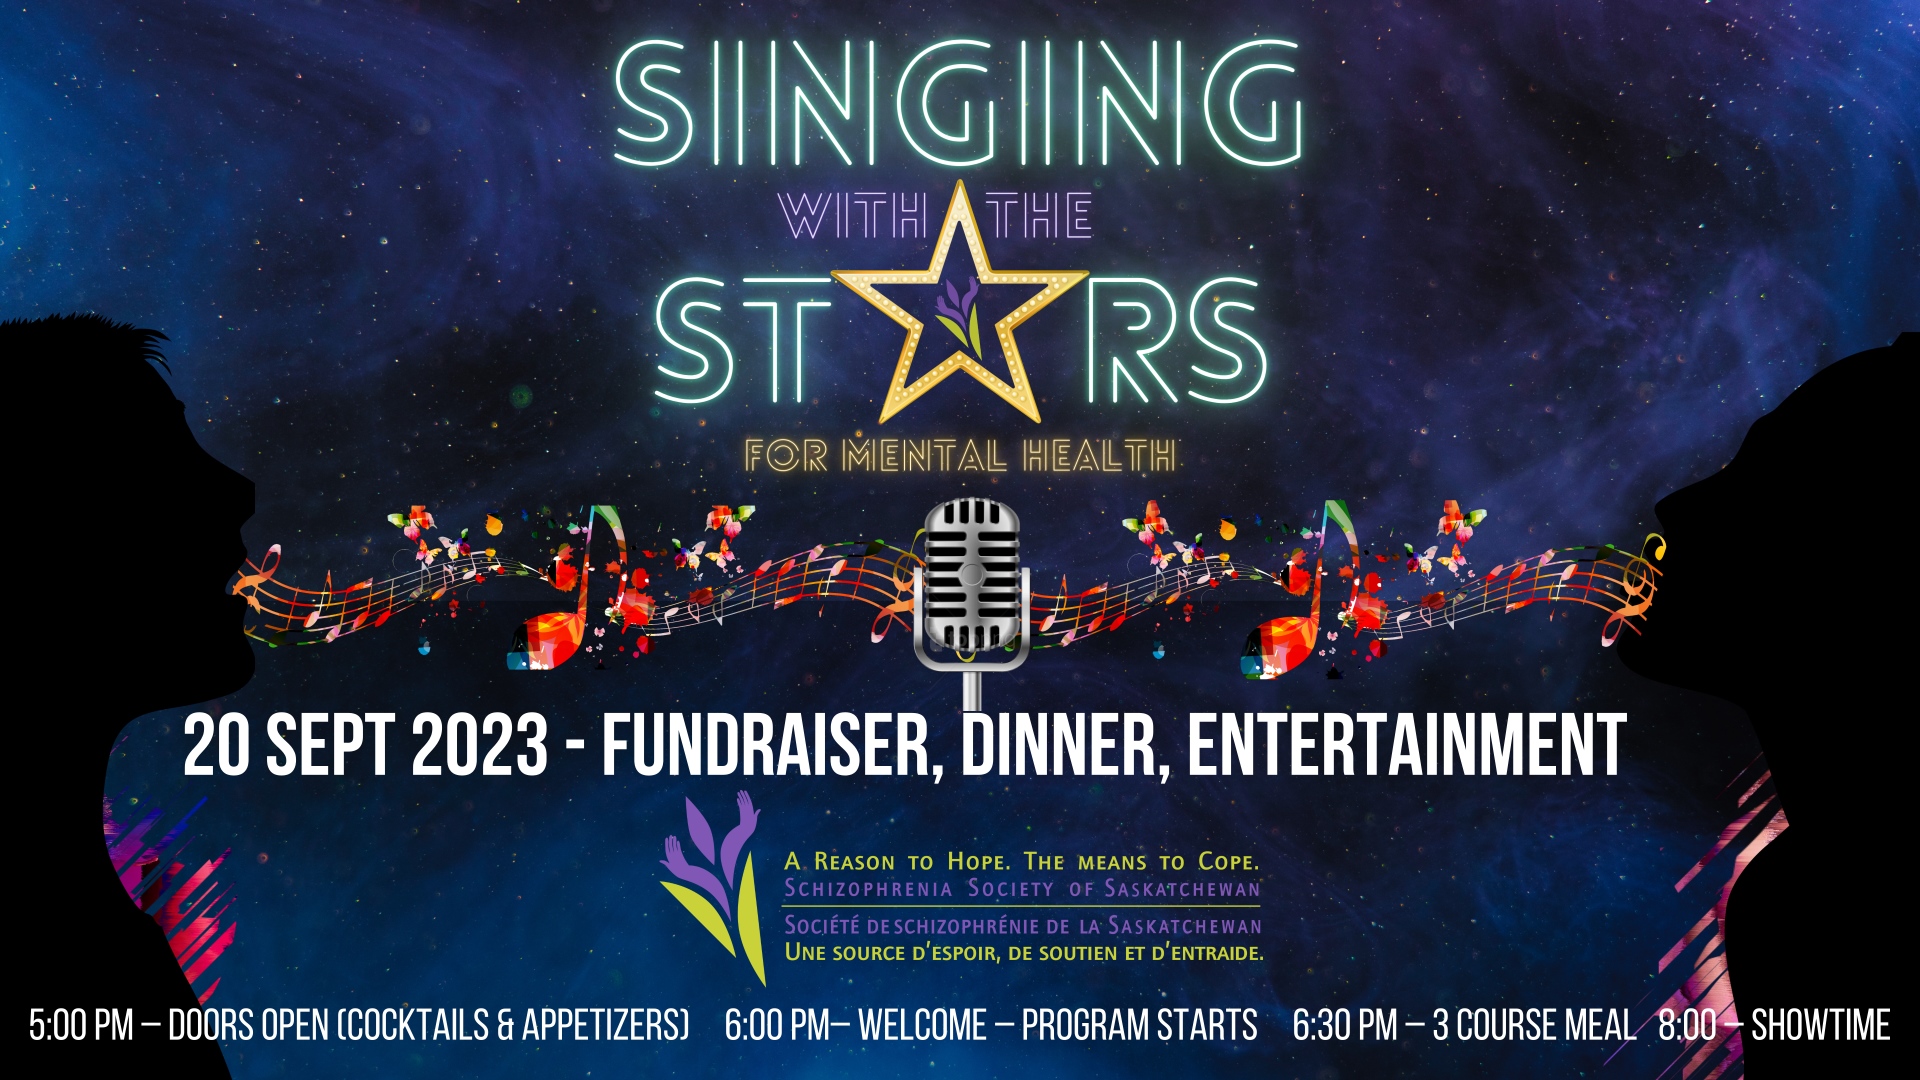 Singing With The Stars For Mental Health - September 20th at TCU Place